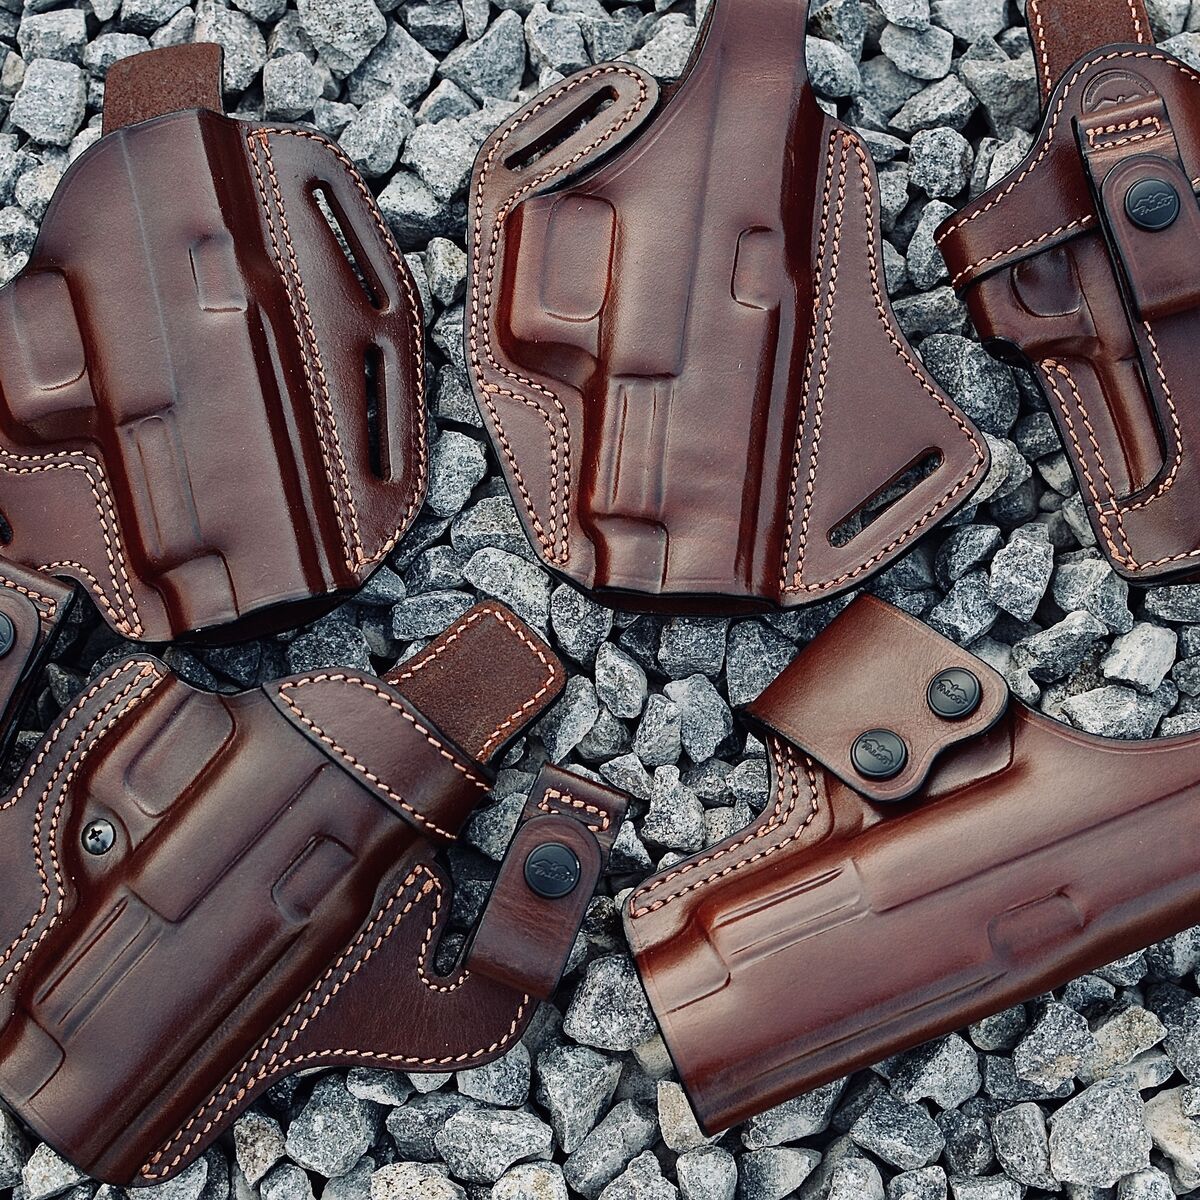 outside the waist holsters